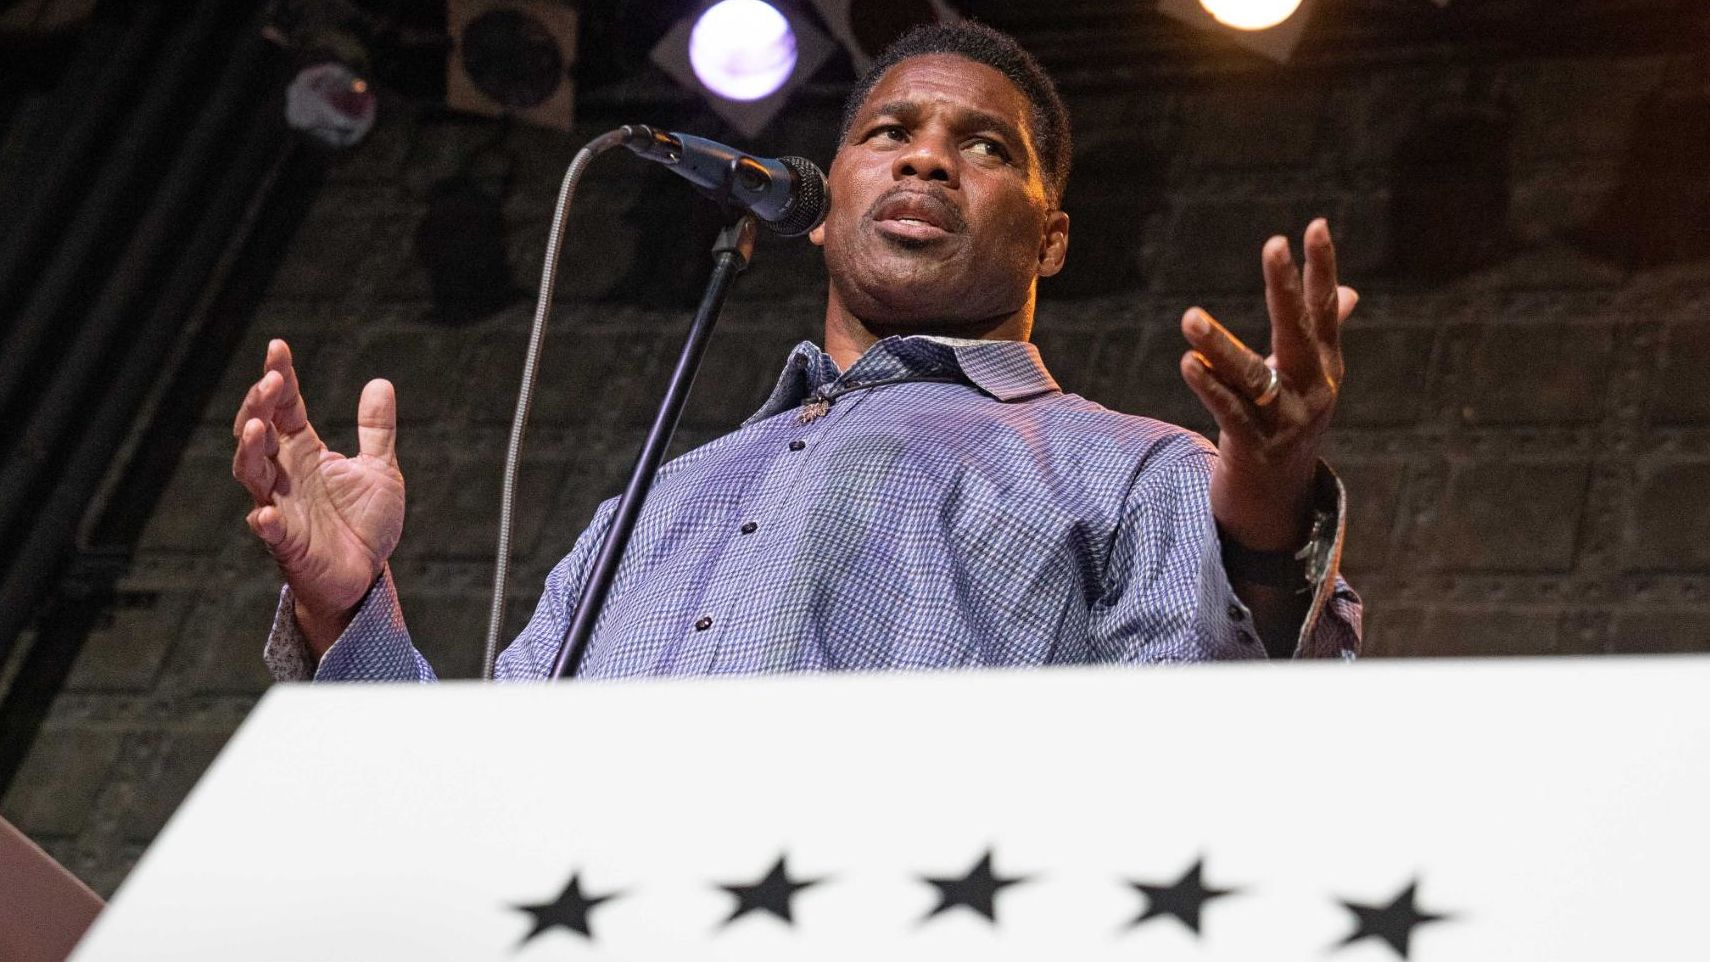 Heisman Trophy winner and Republican candidate for US Senate Herschel Walker speaks at a rally on May 23, 2022, in Athens, Georgia.